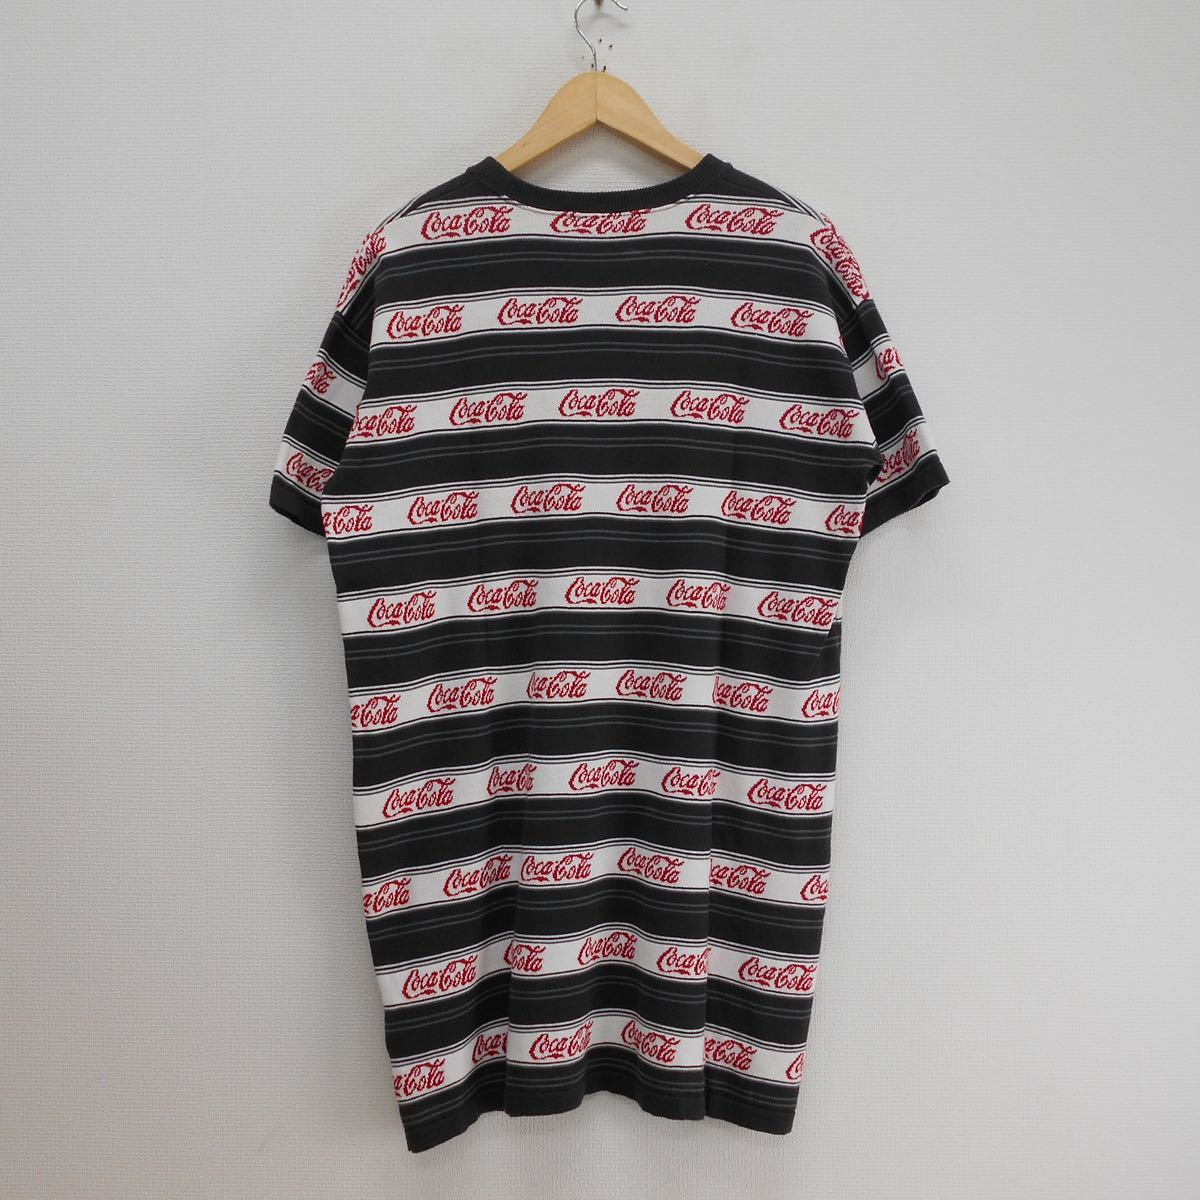 X-girl エックスガール 105202041012 COCA-COLA STRIPED S/S TEE コカコーラ 半袖 Tシャツ ワンピース ロゴ ボーダー M 10111843